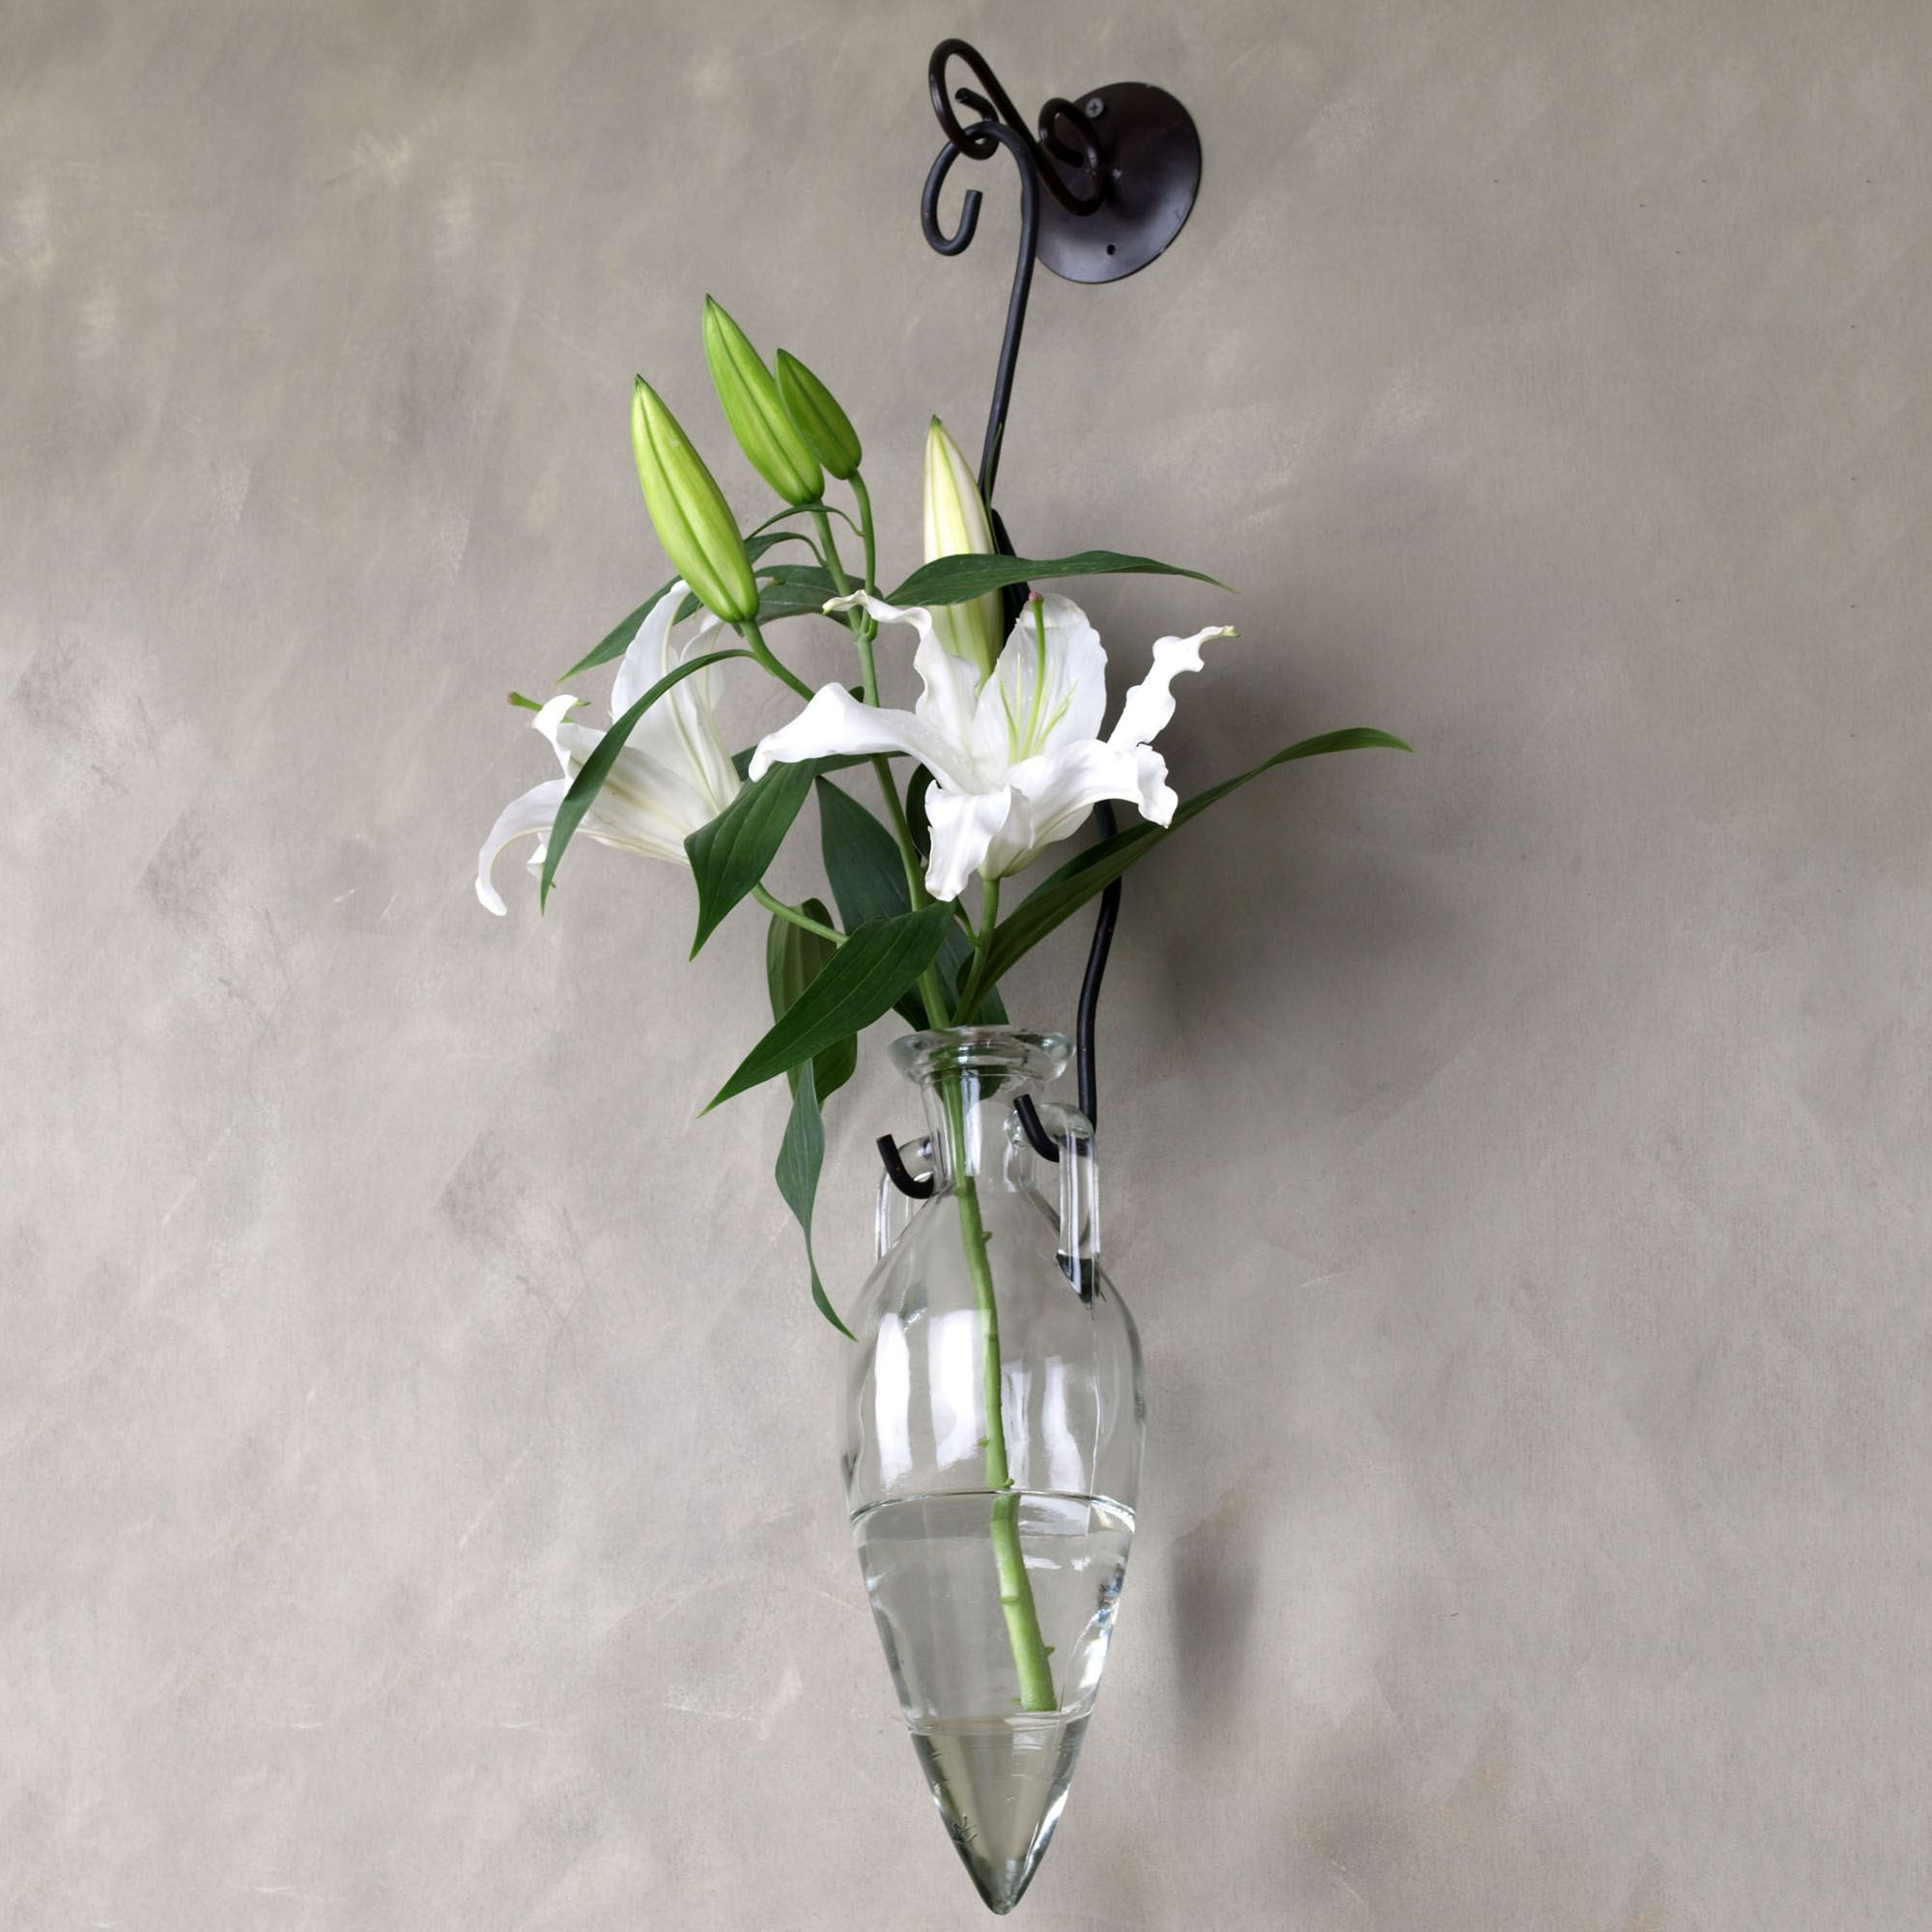 22 Unique Glass Vases wholesale Bulk 2024 free download glass vases wholesale bulk of 24 types of vases for flowers the weekly world intended for h vases wall hanging flower vase newspaper i 0d scheme wall scheme